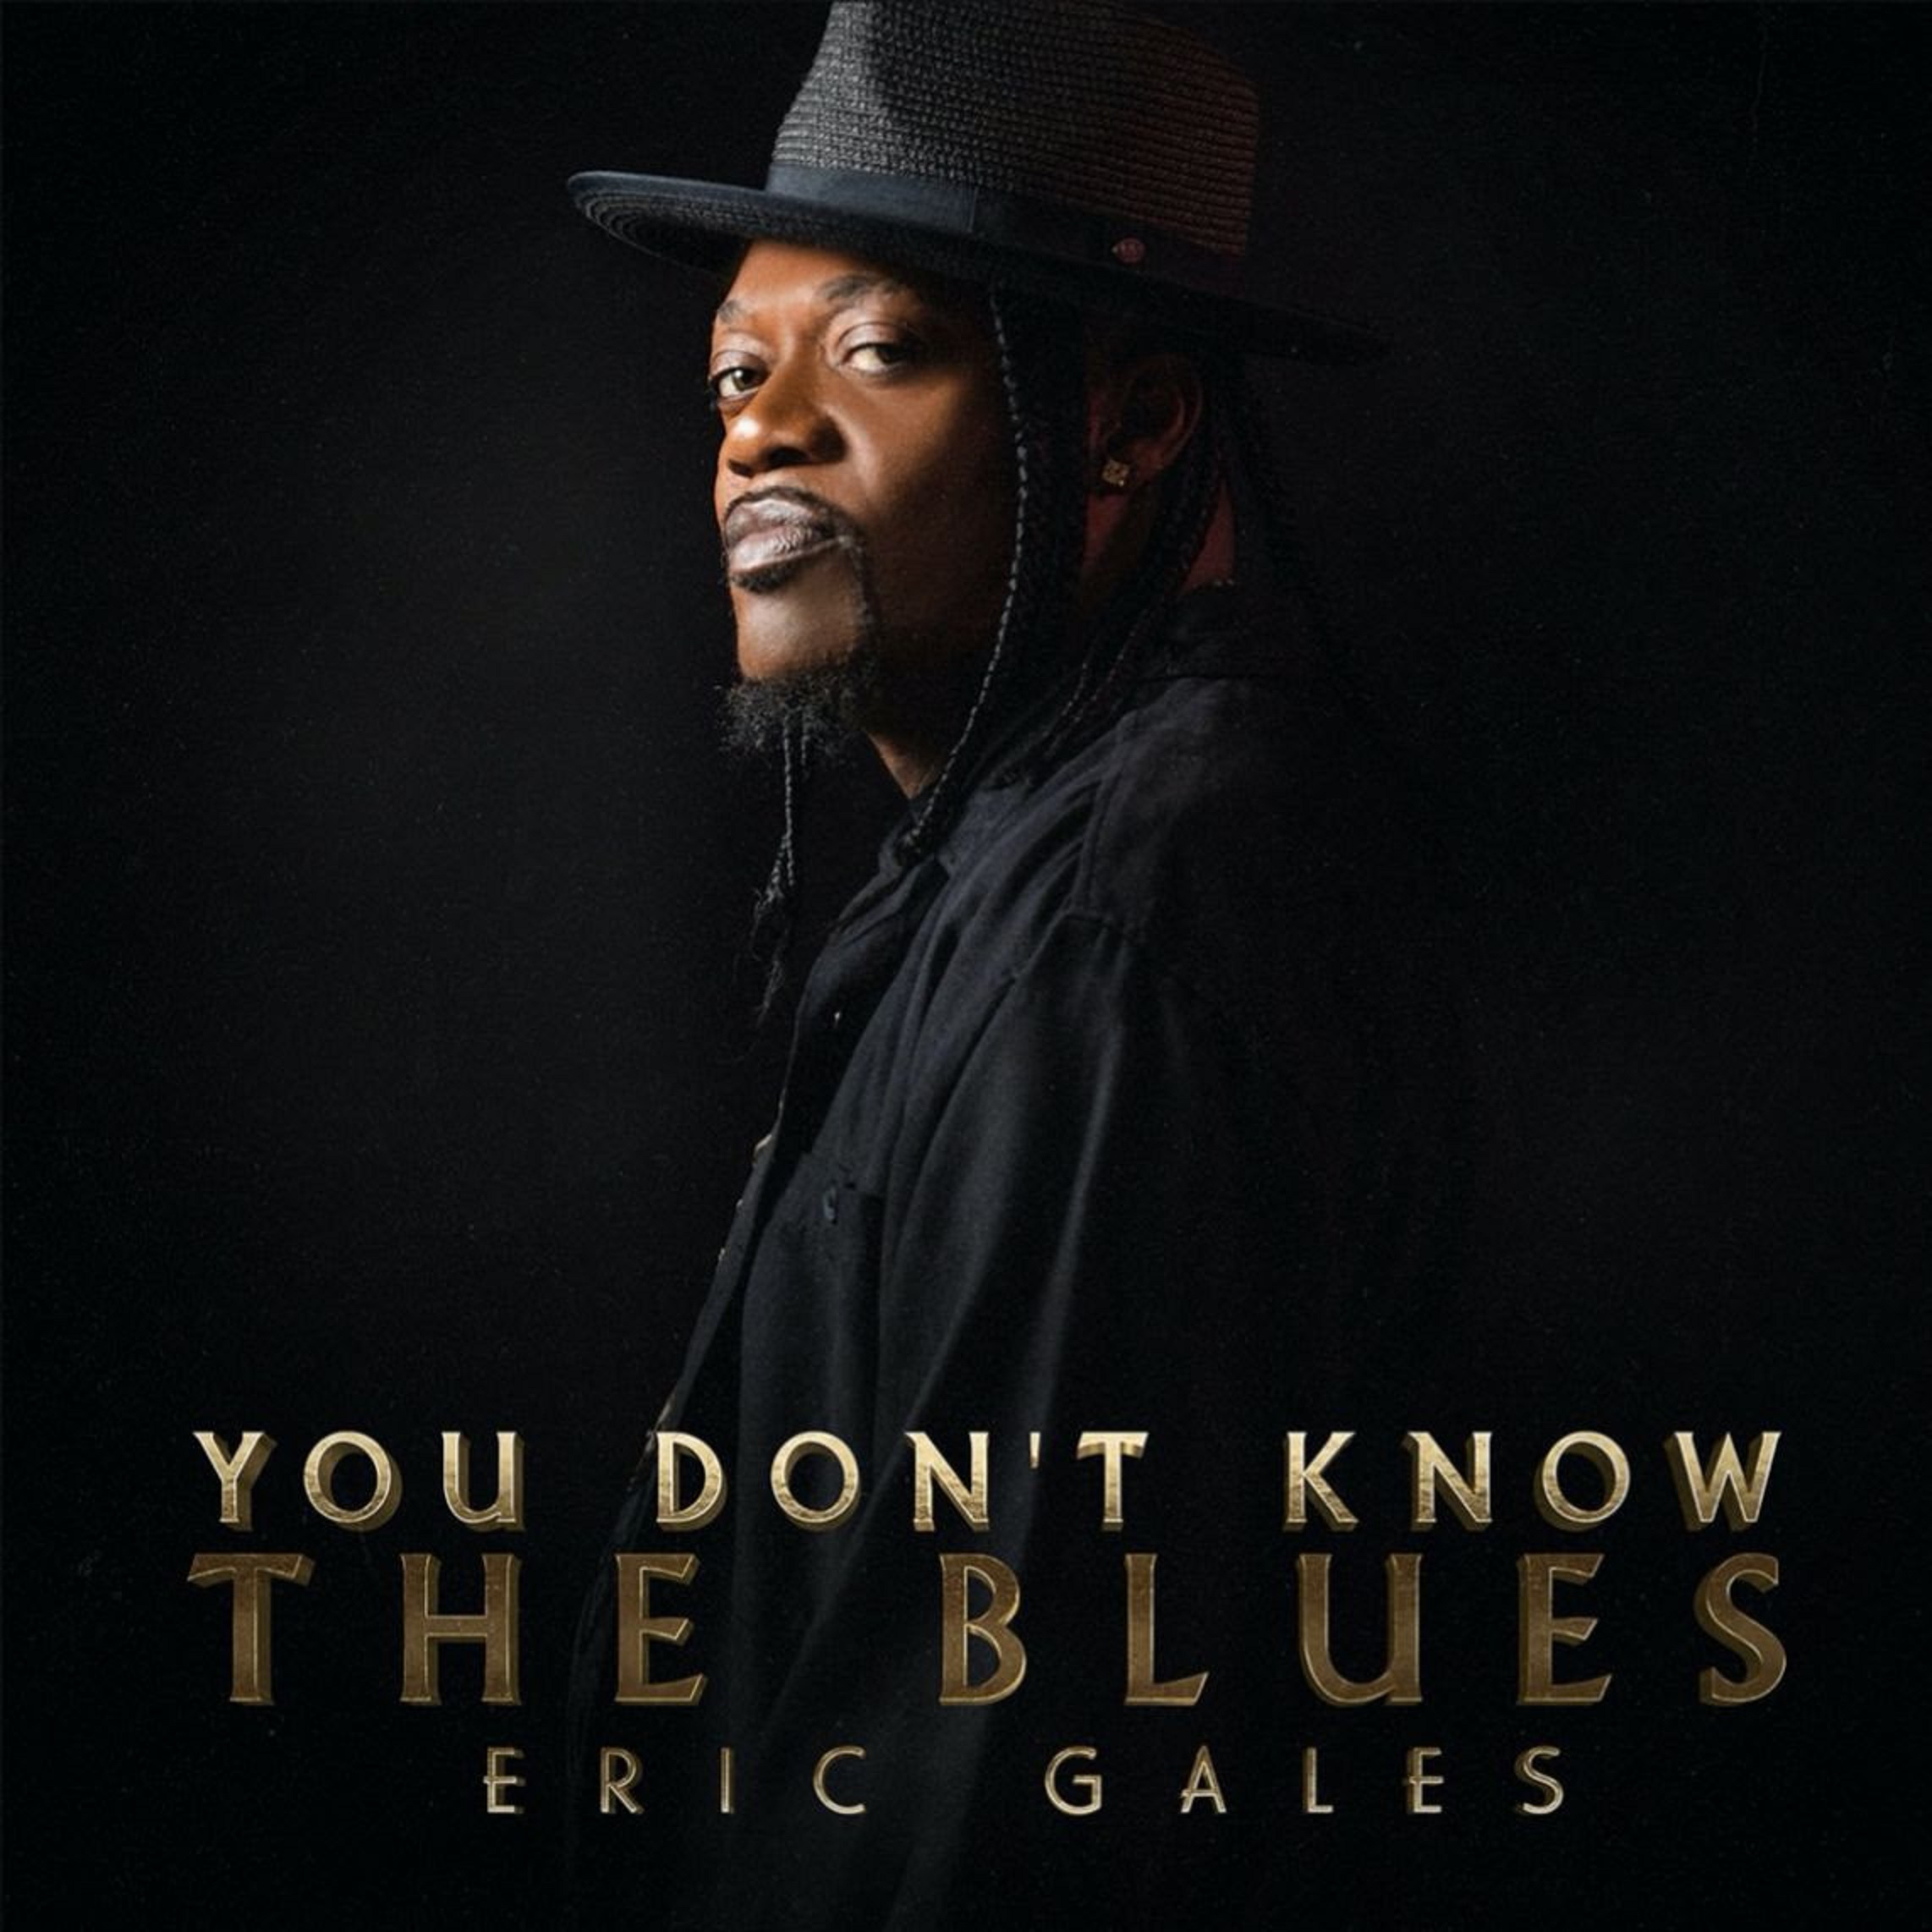 Eric Gales Declares “You Don’t Know The Blues” On Career-Defining New Album, ‘Crown